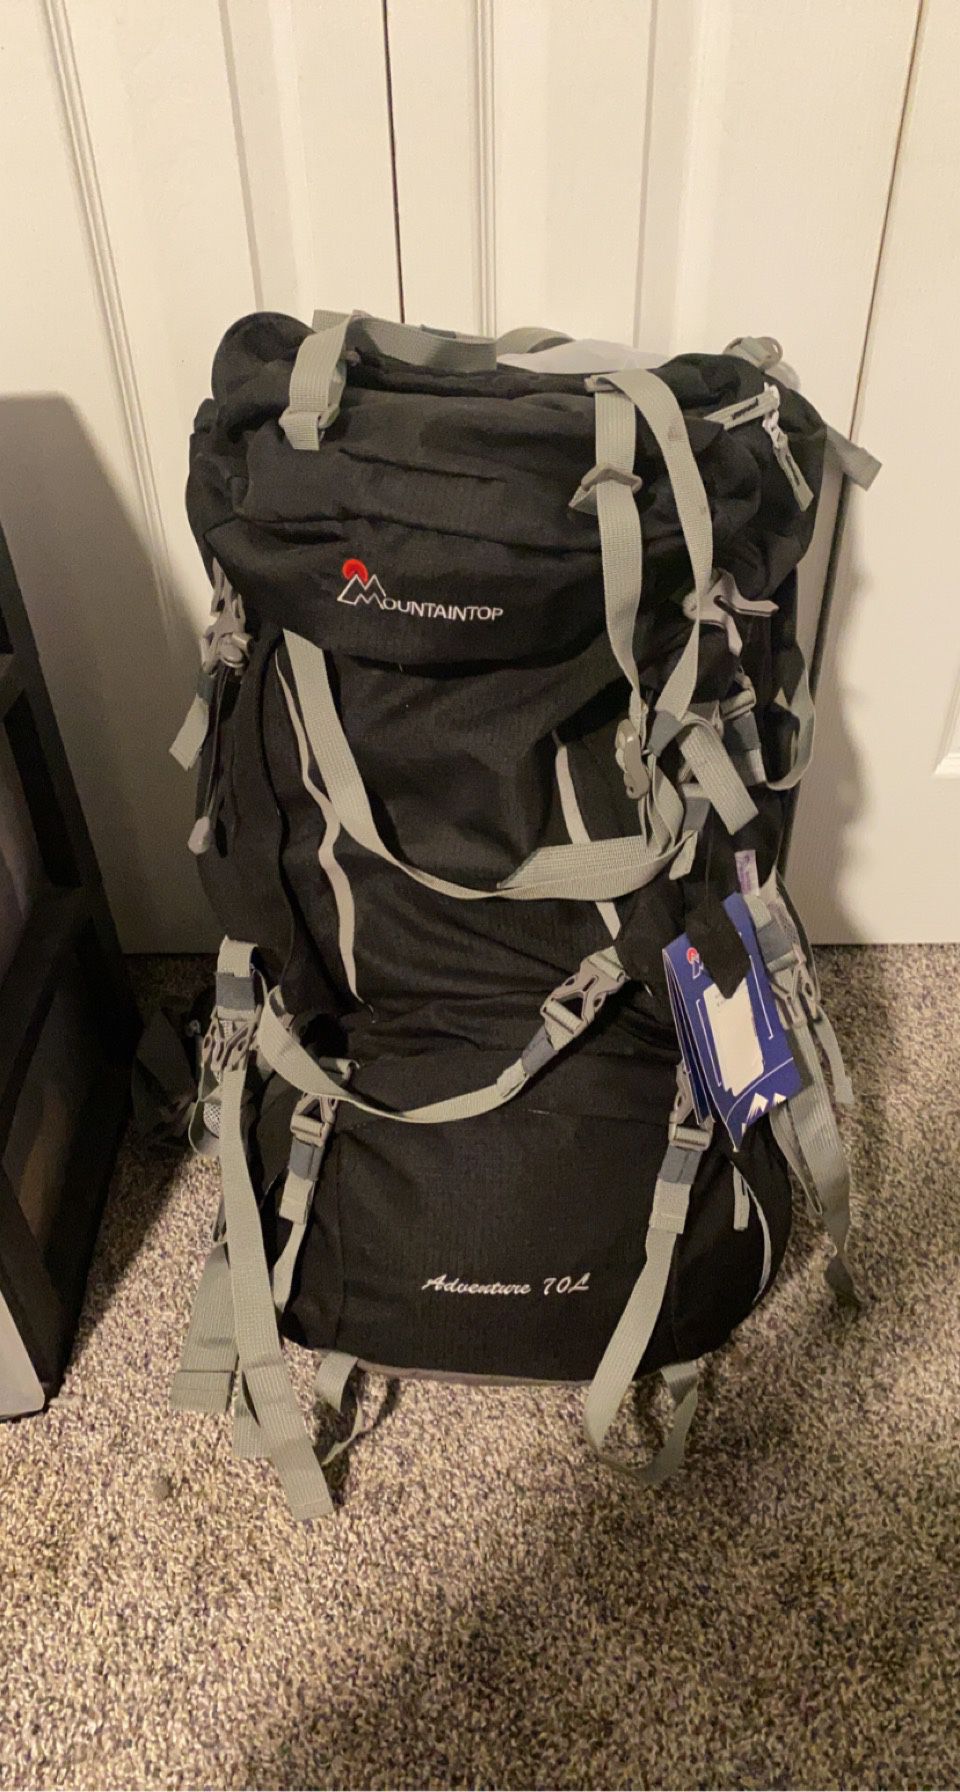 Mountaintop Hiking Pack